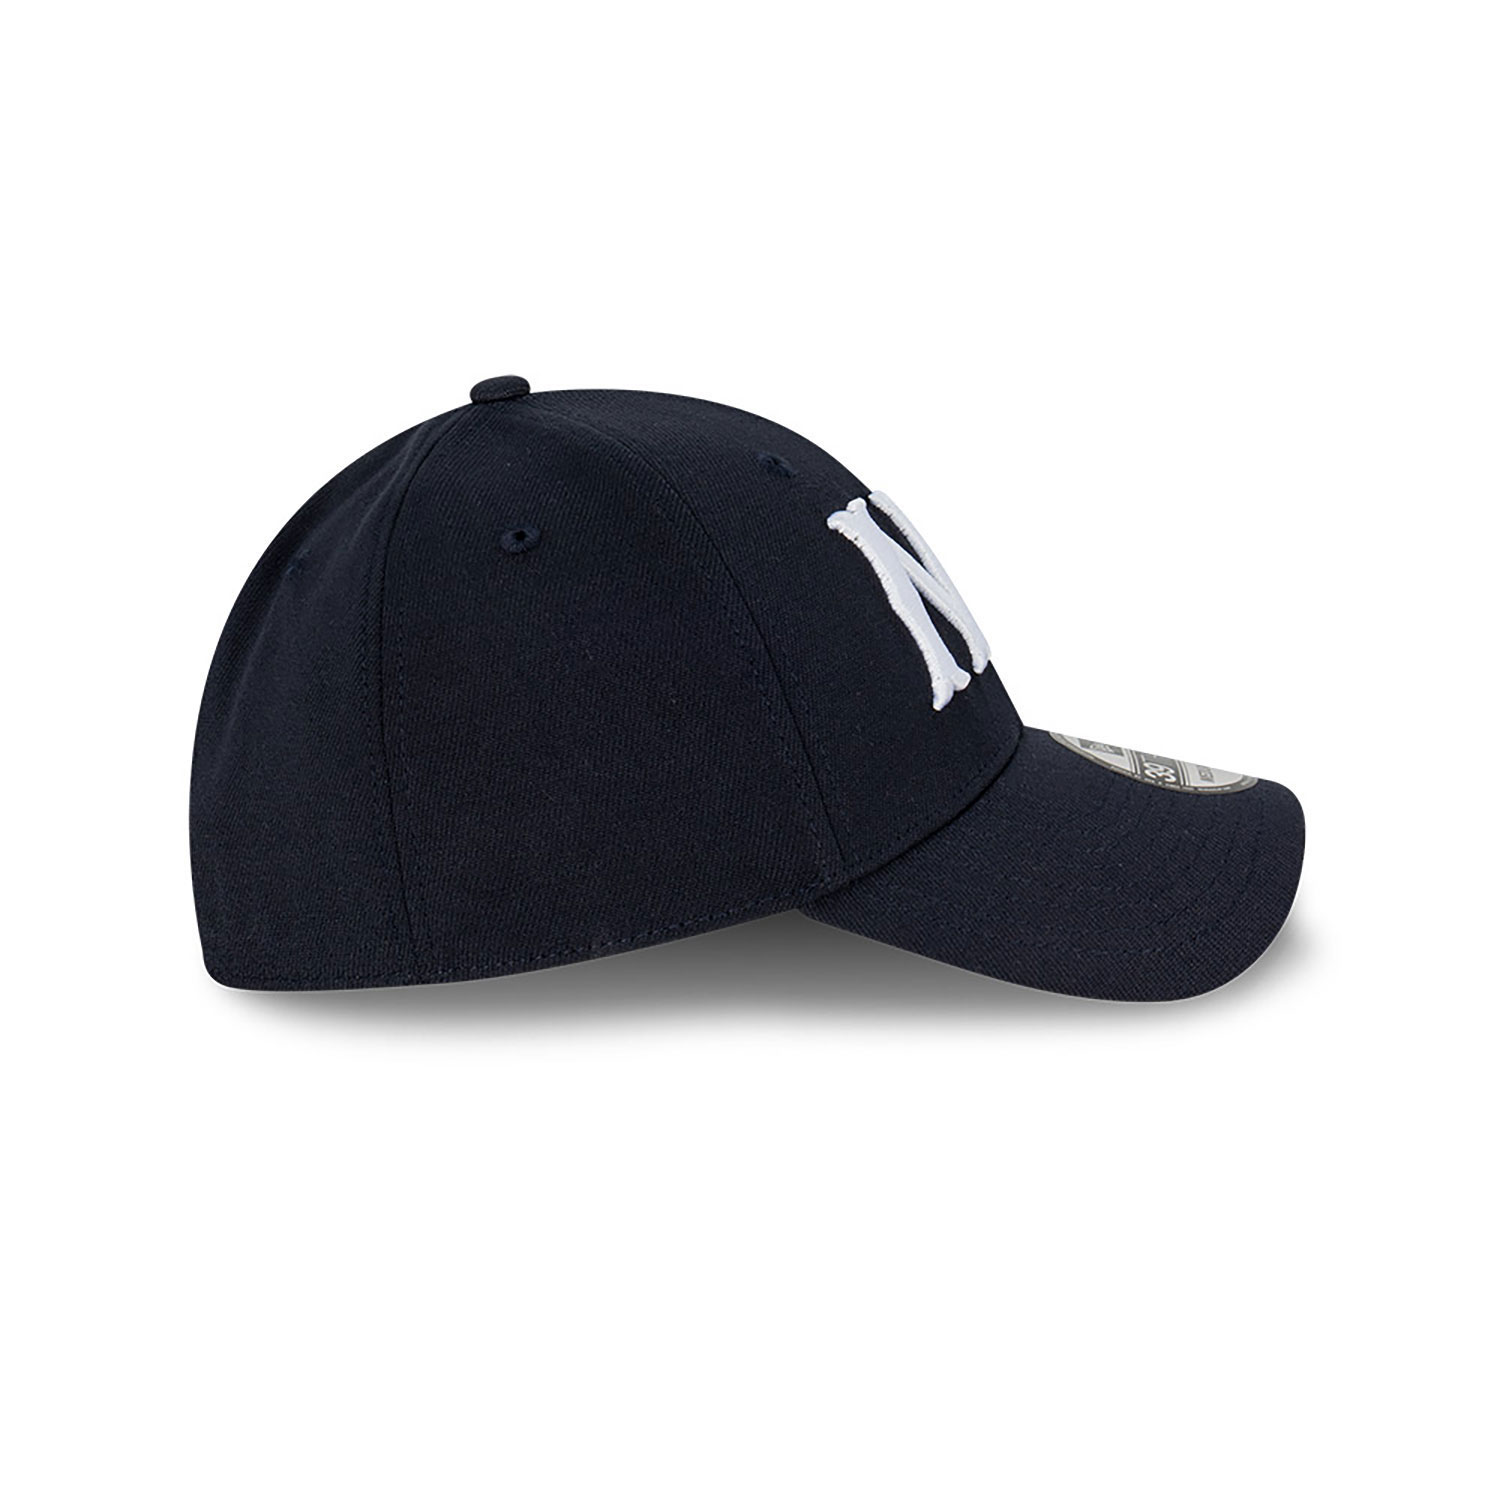 New York Yankees Cooperstown Navy 39THIRTY Stretch Fit Cap